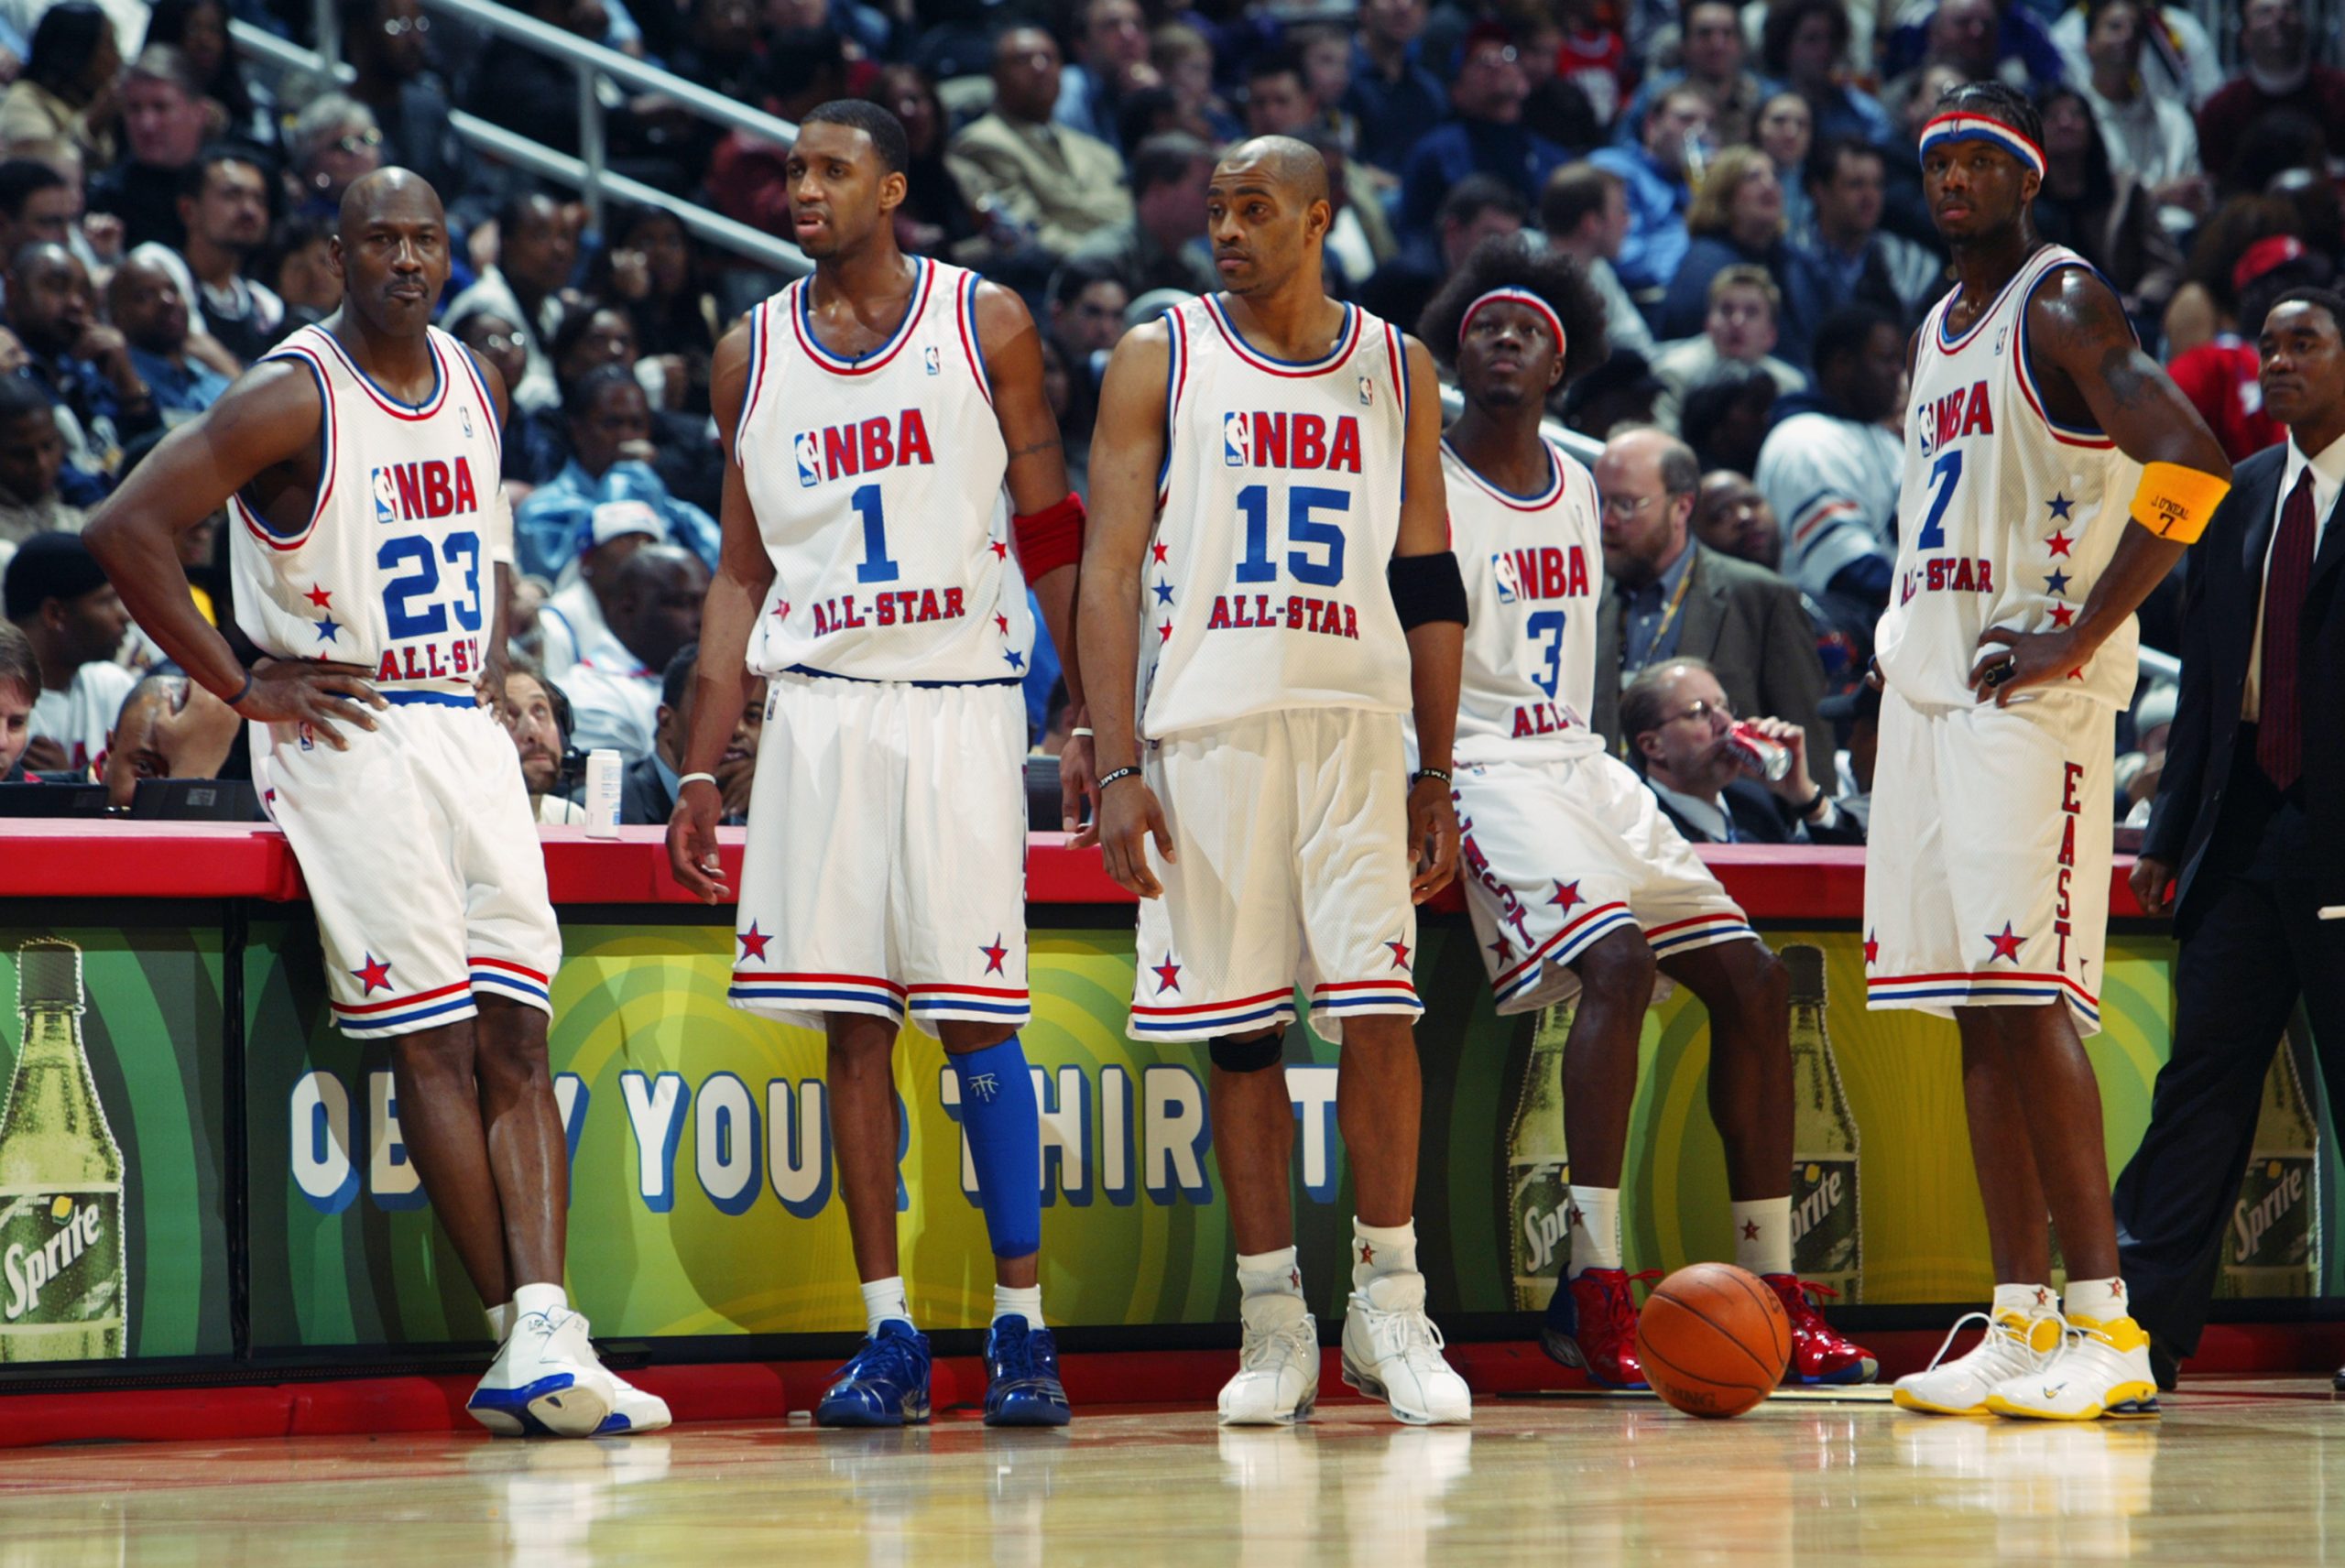 Here's a Look Back at the 2003 NBA All-Star Game in Atlanta